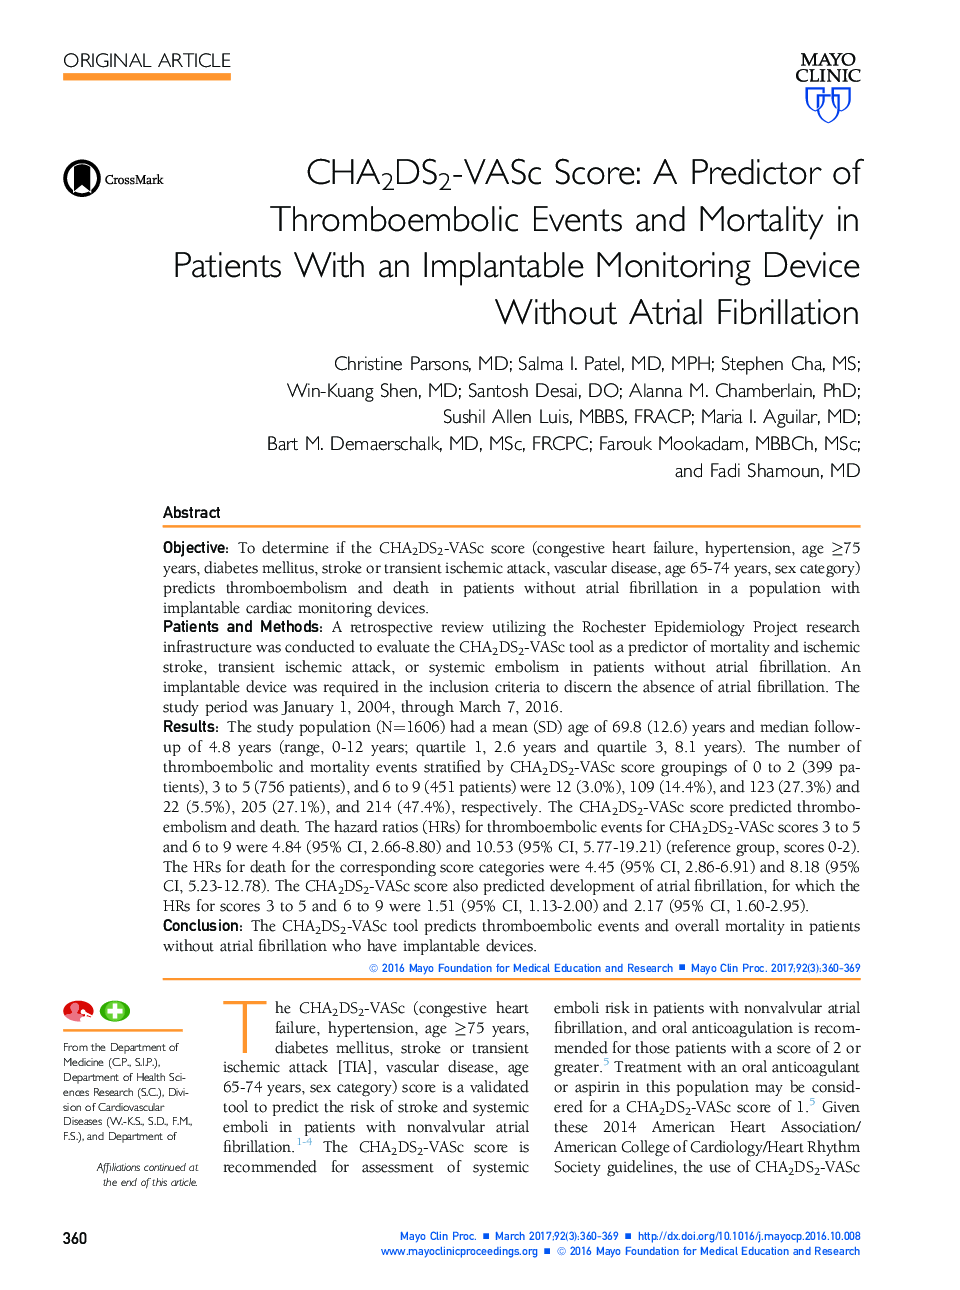 CHA2DS2-VASc Score: A Predictor of Thromboembolic Events and Mortality in Patients With an Implantable Monitoring Device Without Atrial Fibrillation